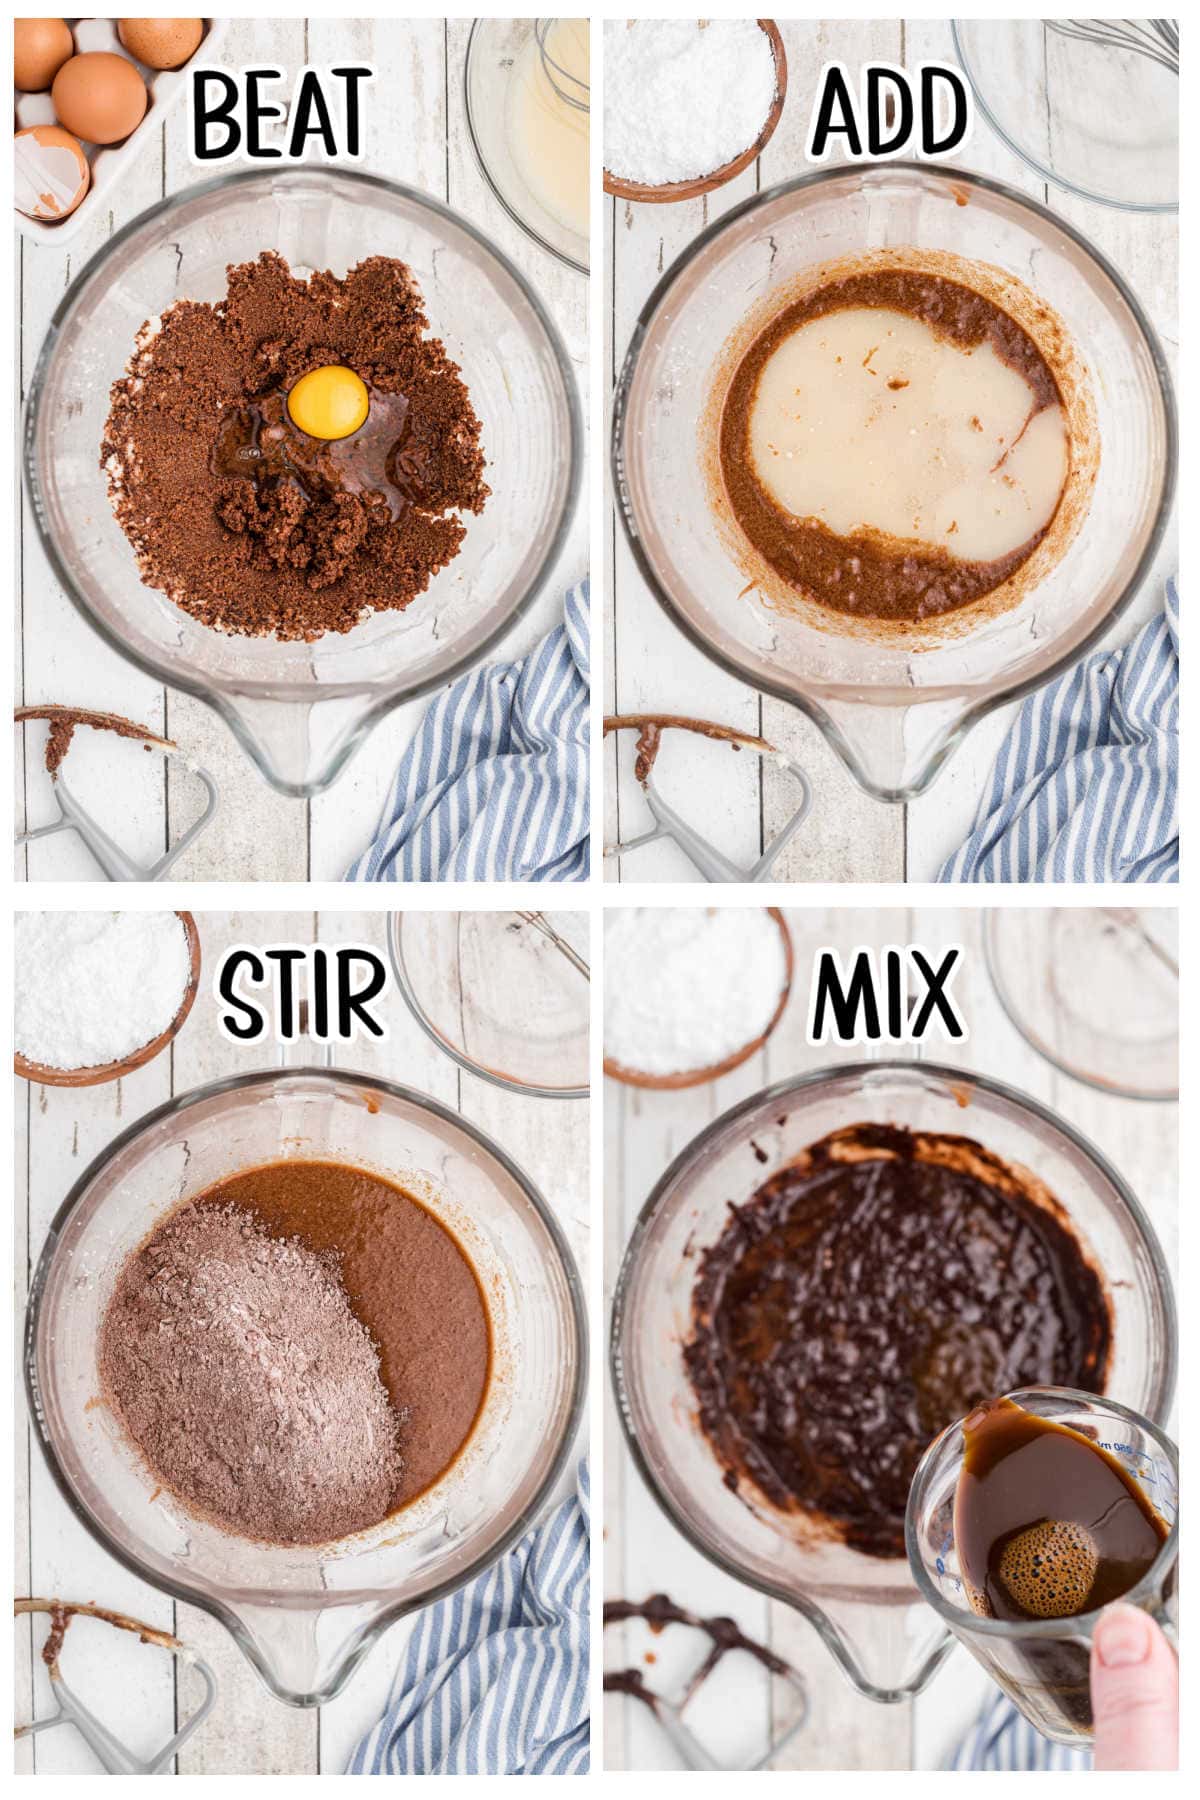 Steps for mixing up the cupcake batter.